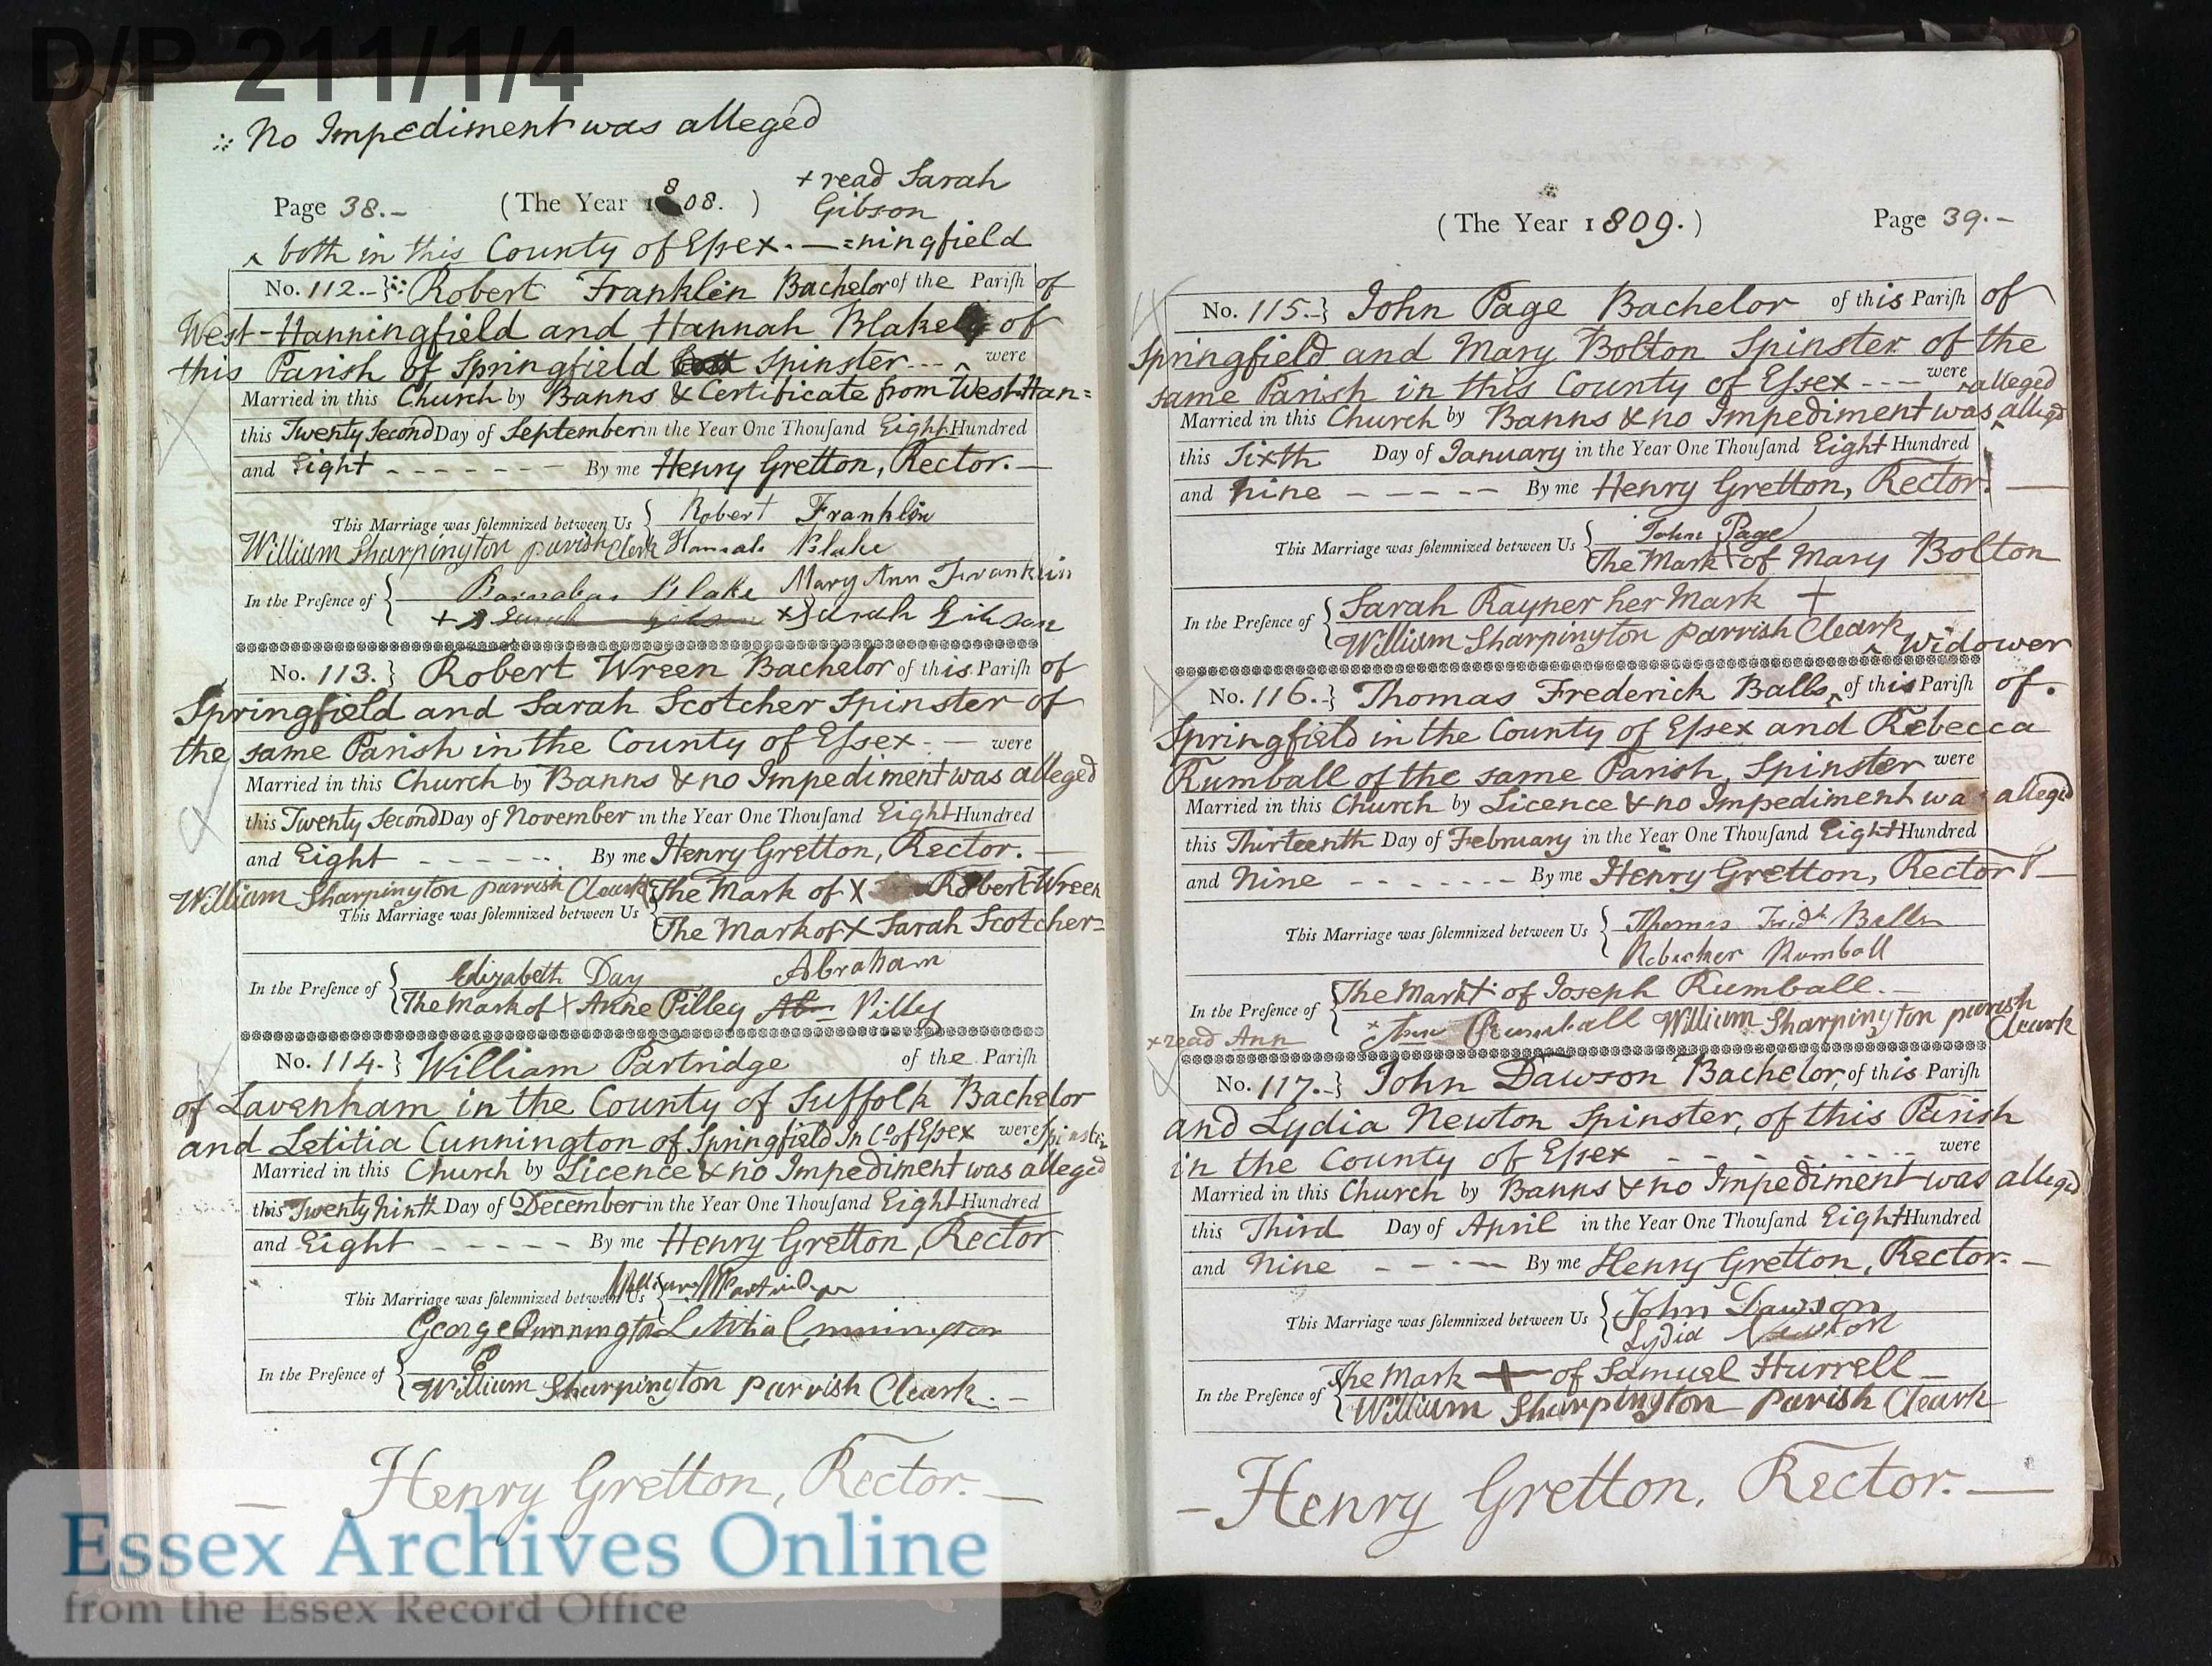 1809 marriage of Rebecca Rumball to Thomas Frederic Balls